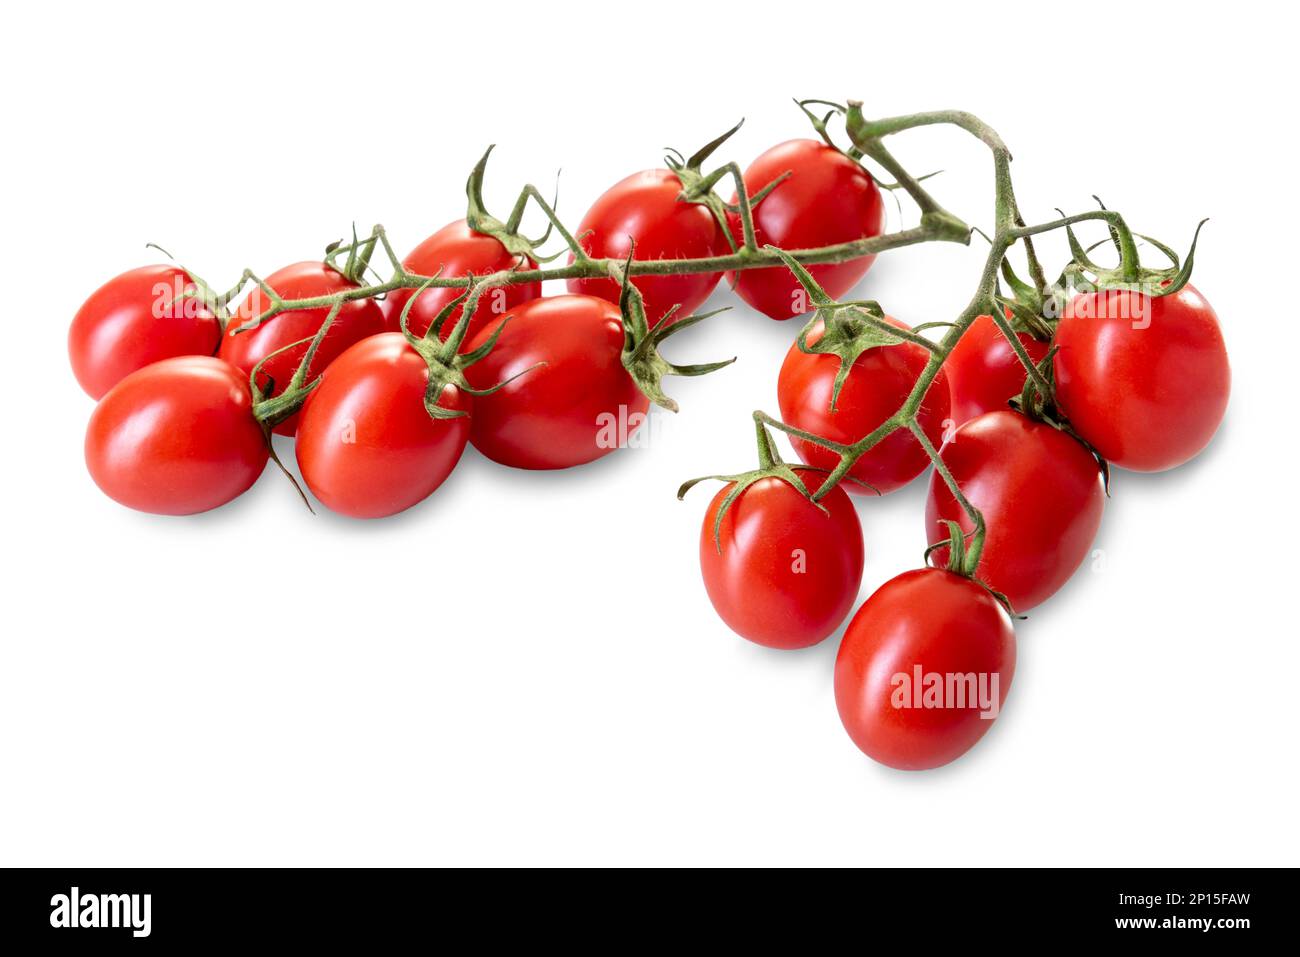 Bunch of cherry tomatoes isolated on white with clipping path included Stock Photo